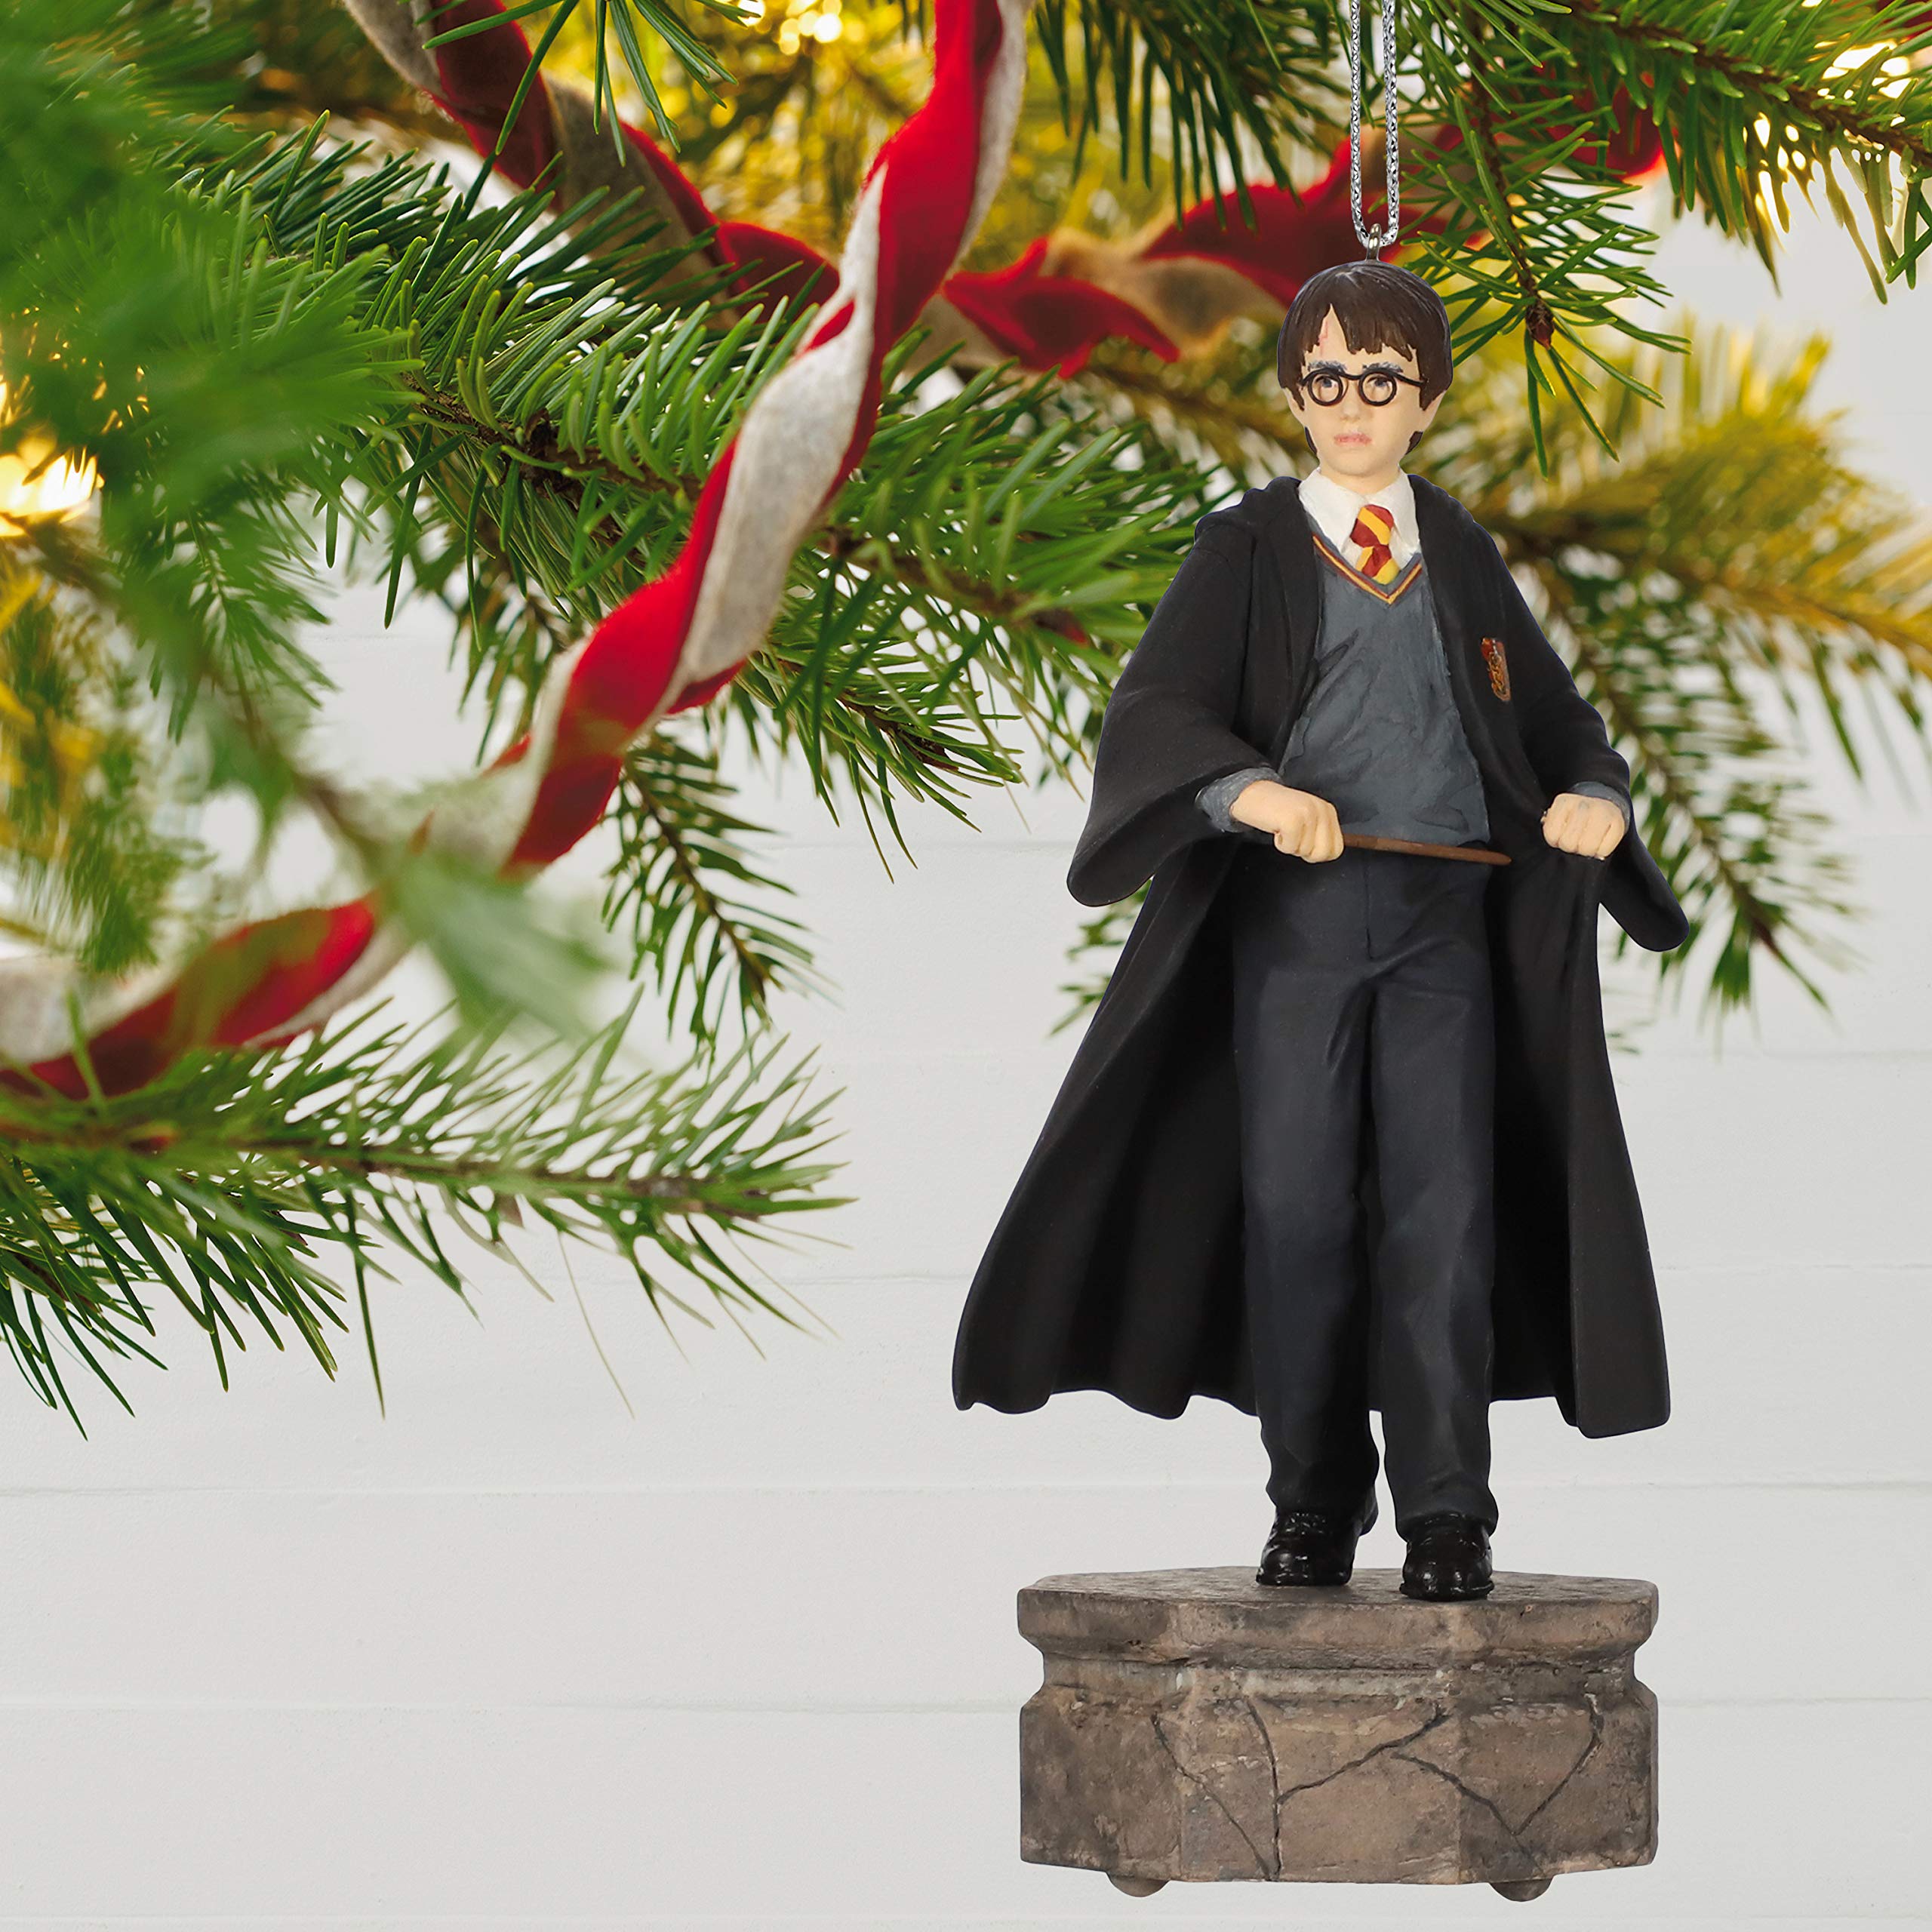 Hallmark Keepsake Christmas Ornament 2019 Year Dated, Harry Potter Collection Harry Potter with Light and Sound